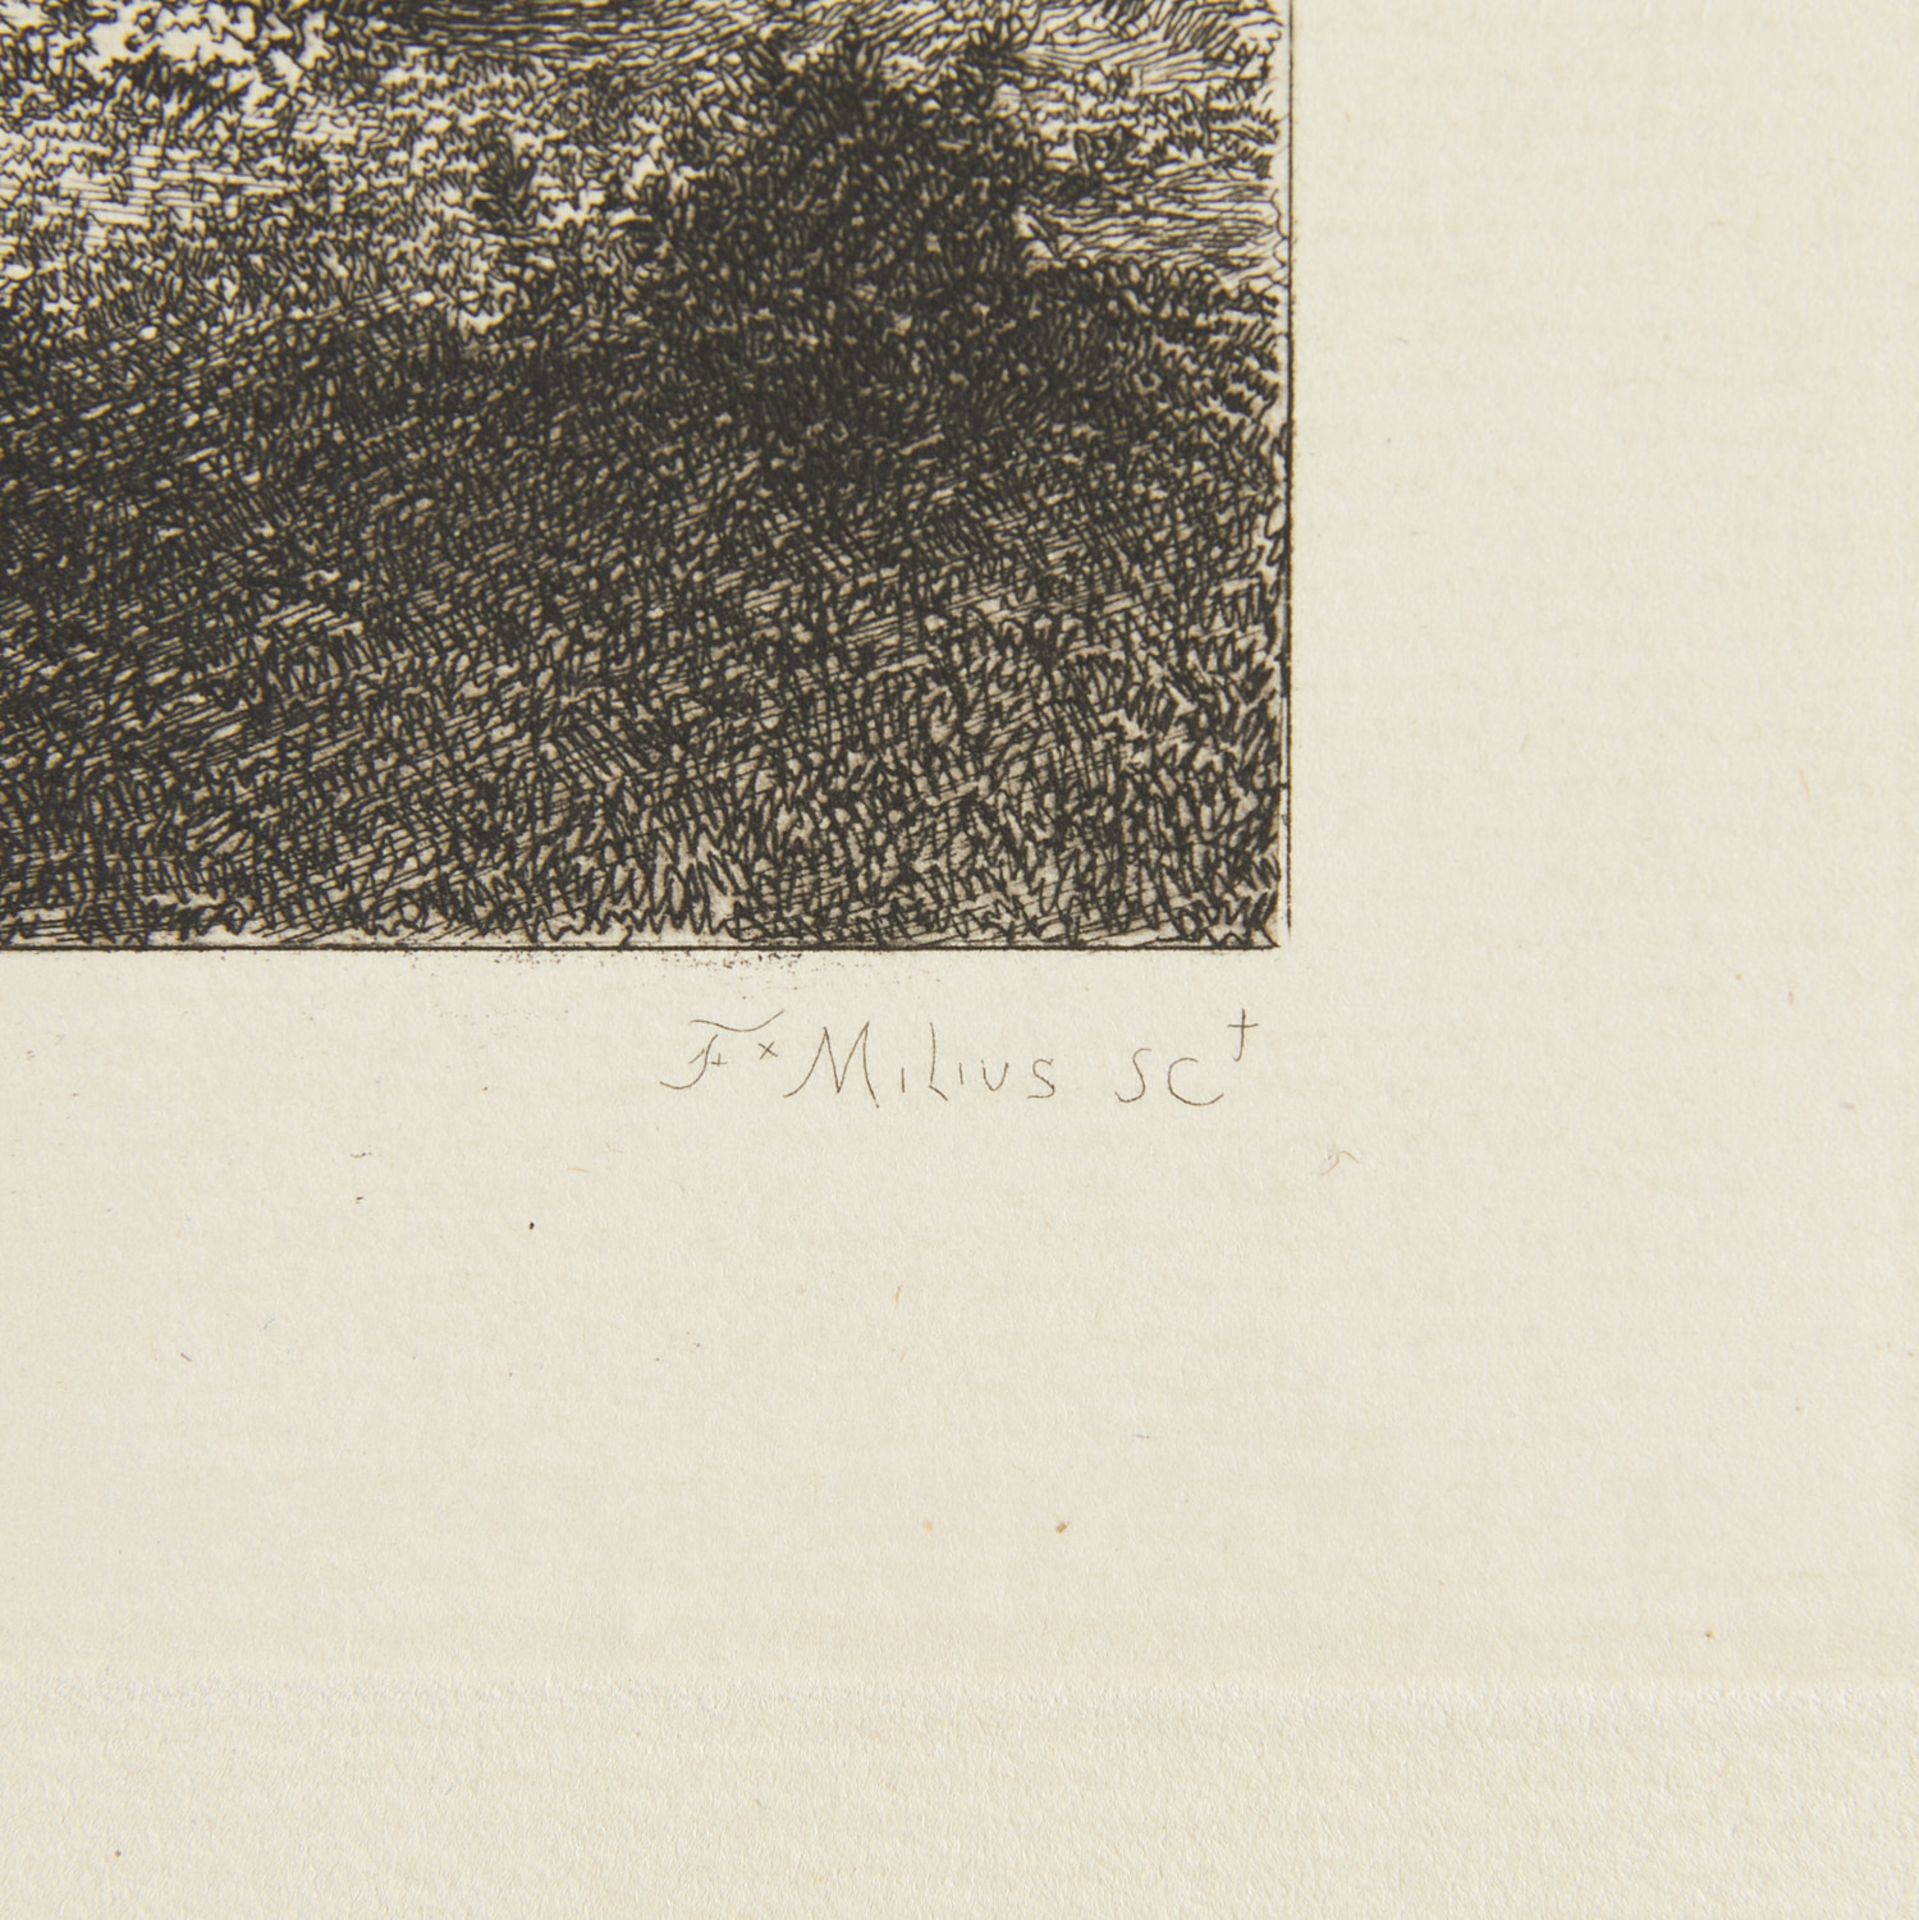 Milius "The Cattle-Field" Etching After Diaz - Image 2 of 6